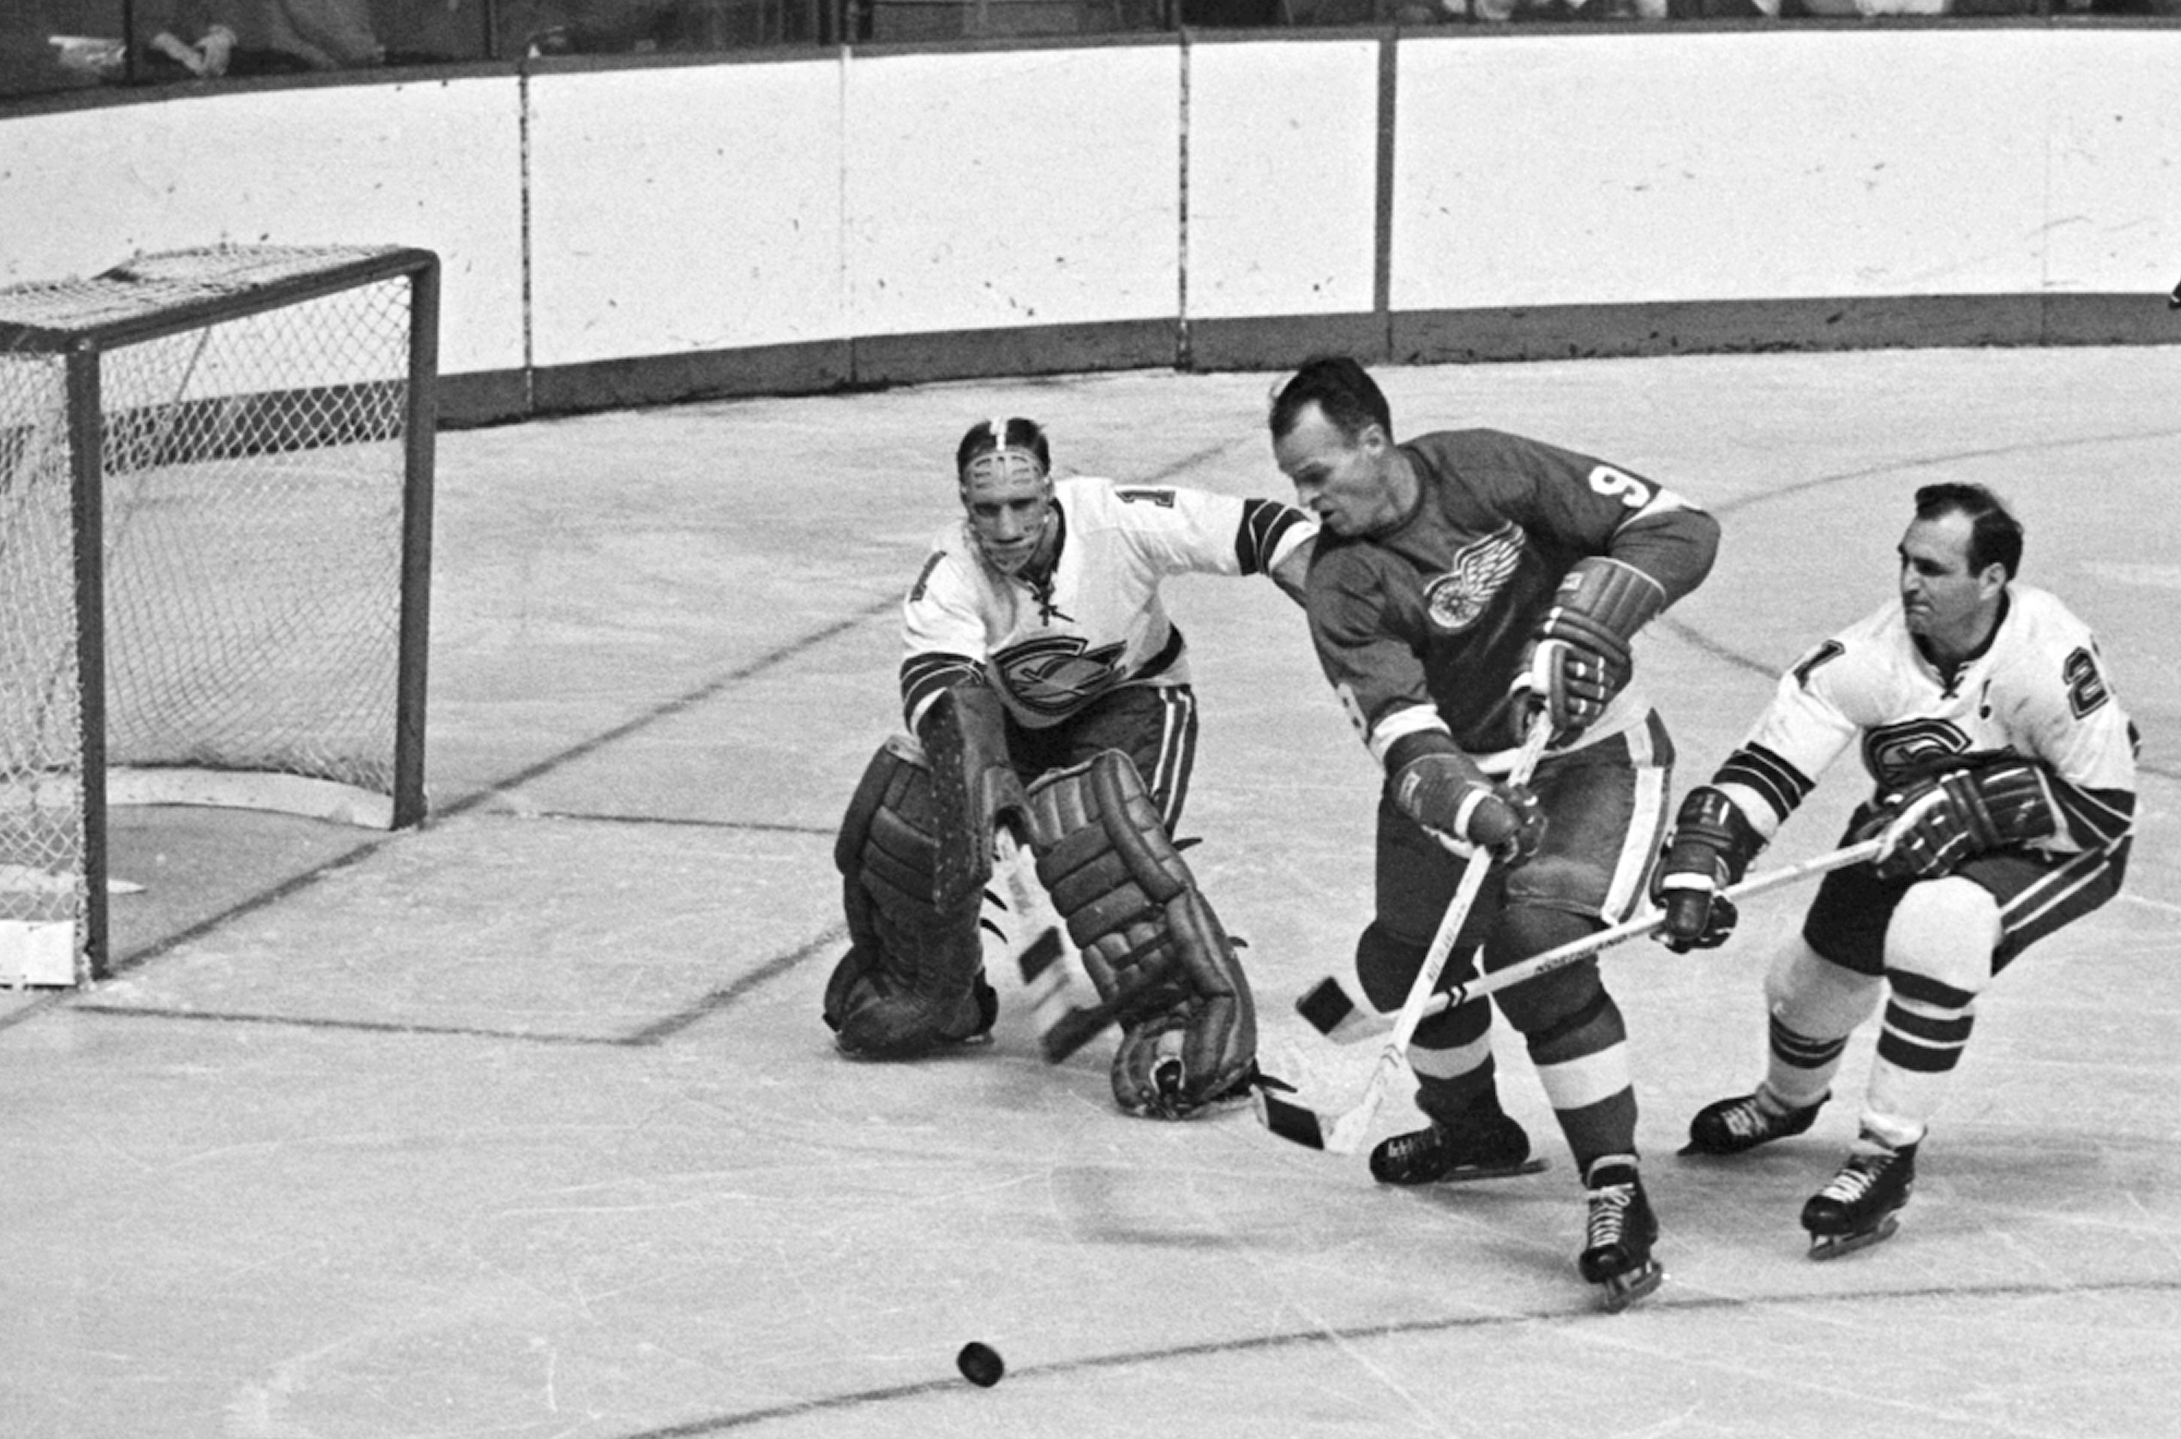 Ranking the top 5 greatest black NHL players of all-time - Page 4